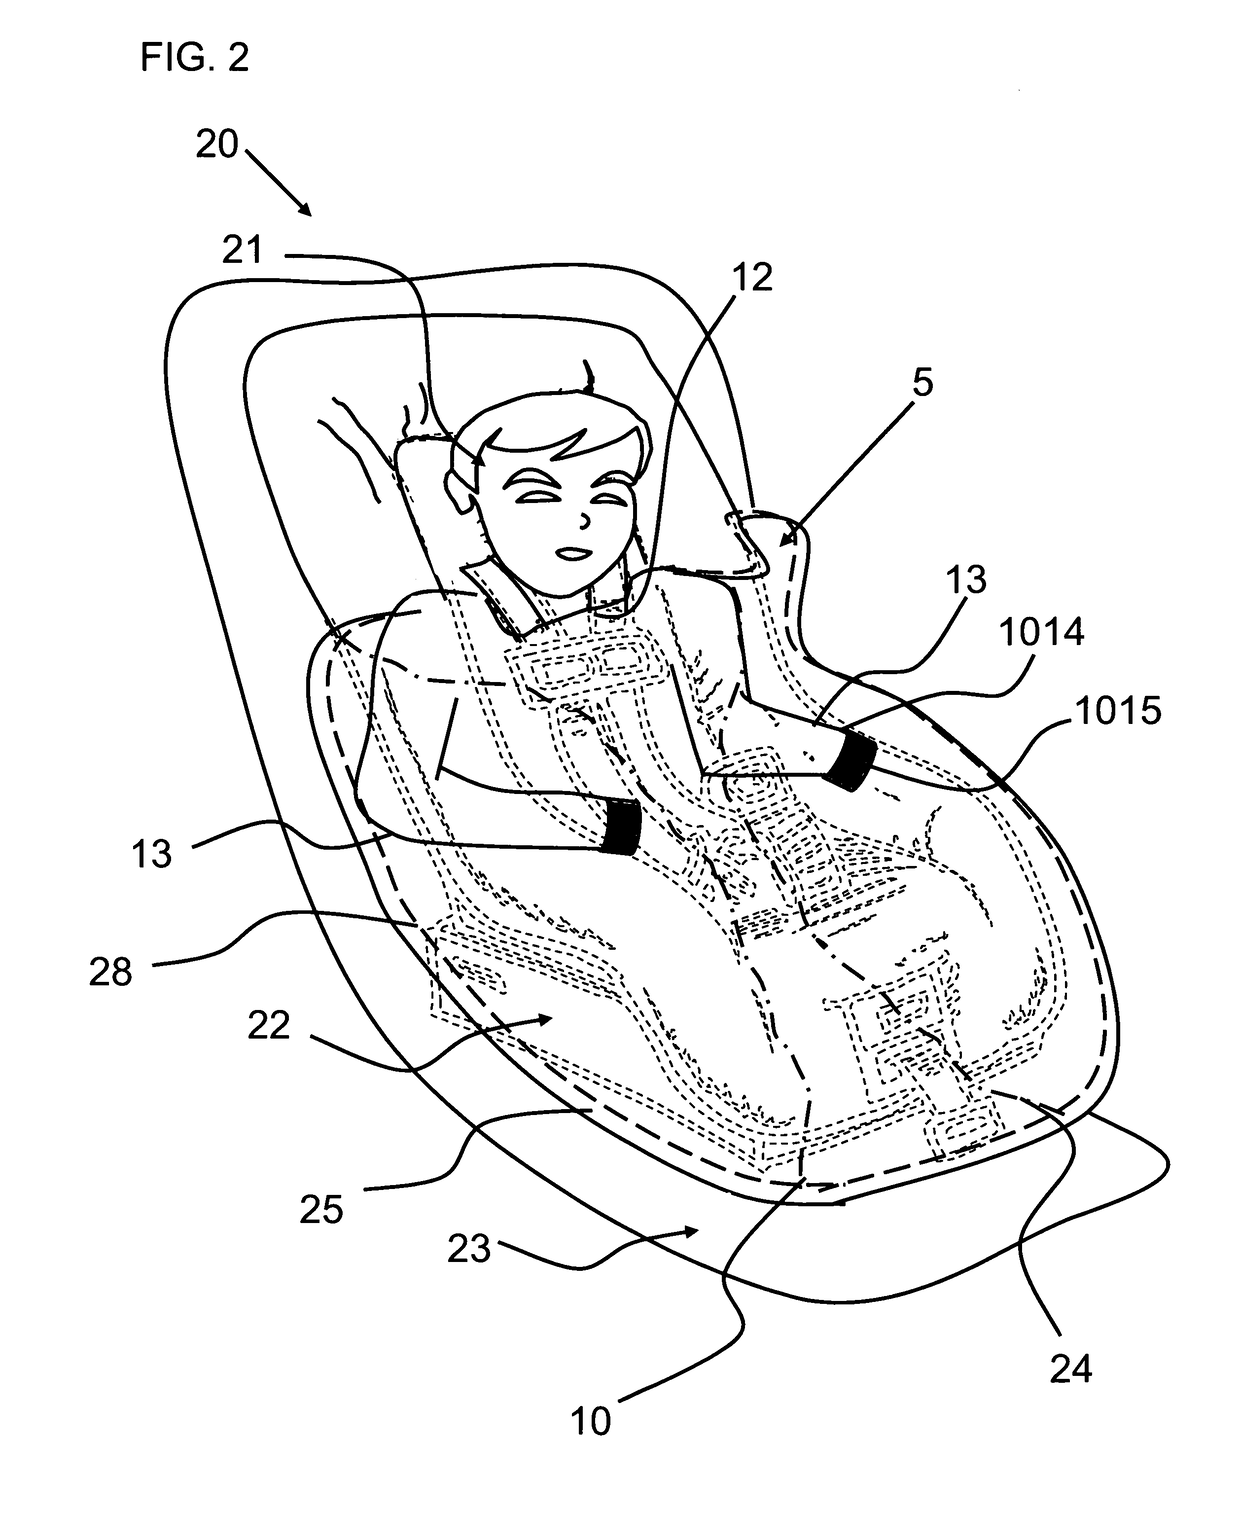 Blanket for placement upon an infant secured in a seat and method of use